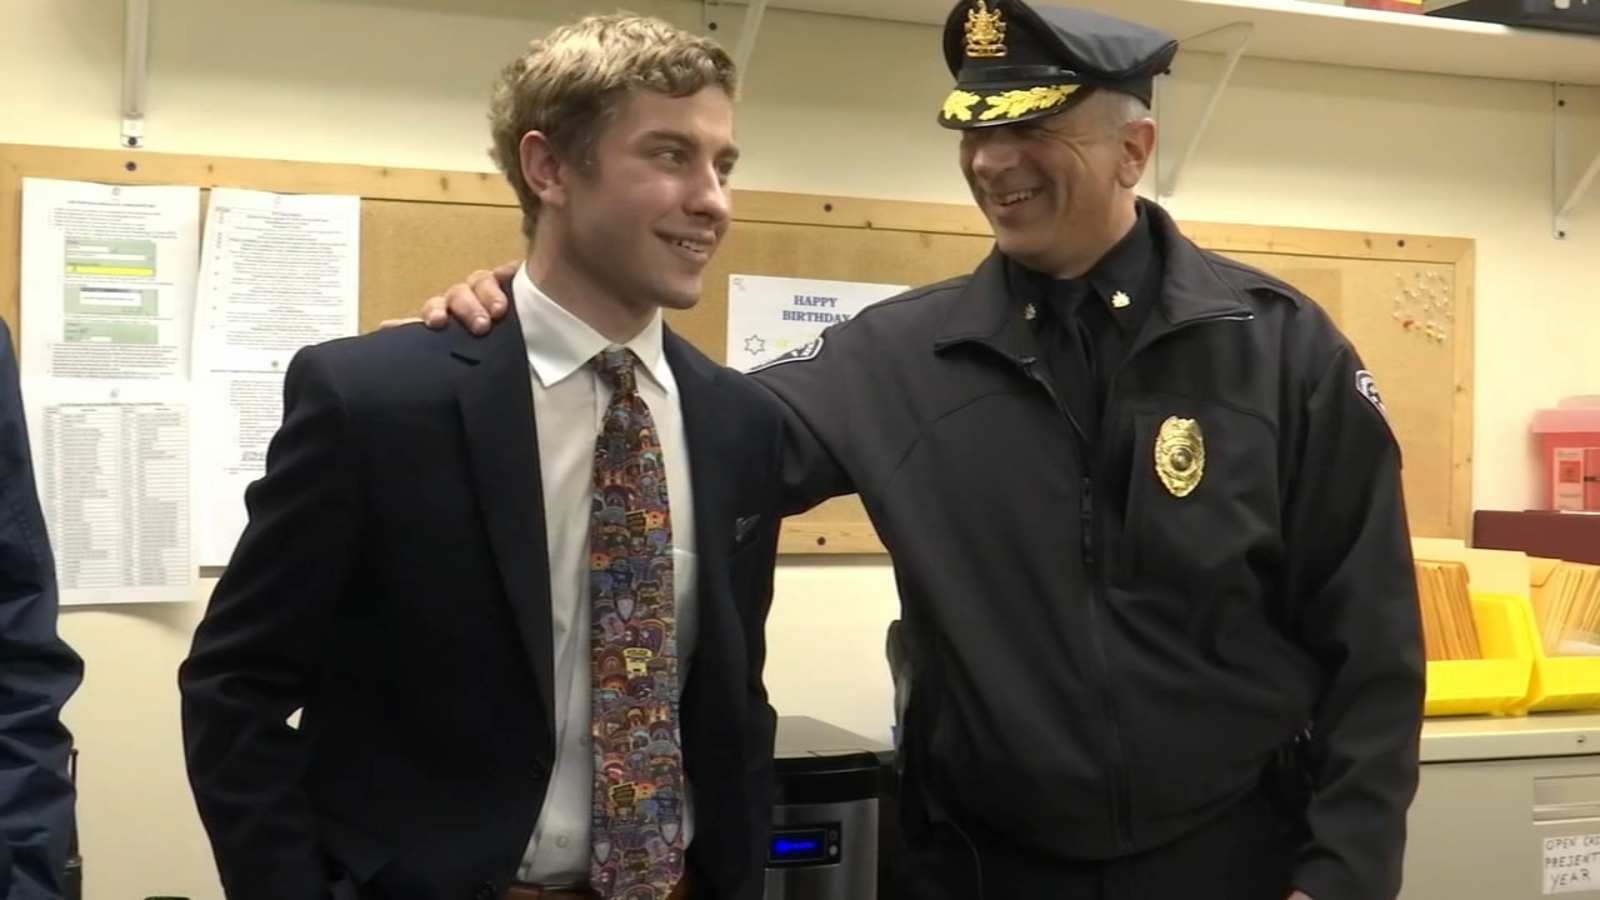  Malvern teen visits 71 police departments to raise autism awareness 